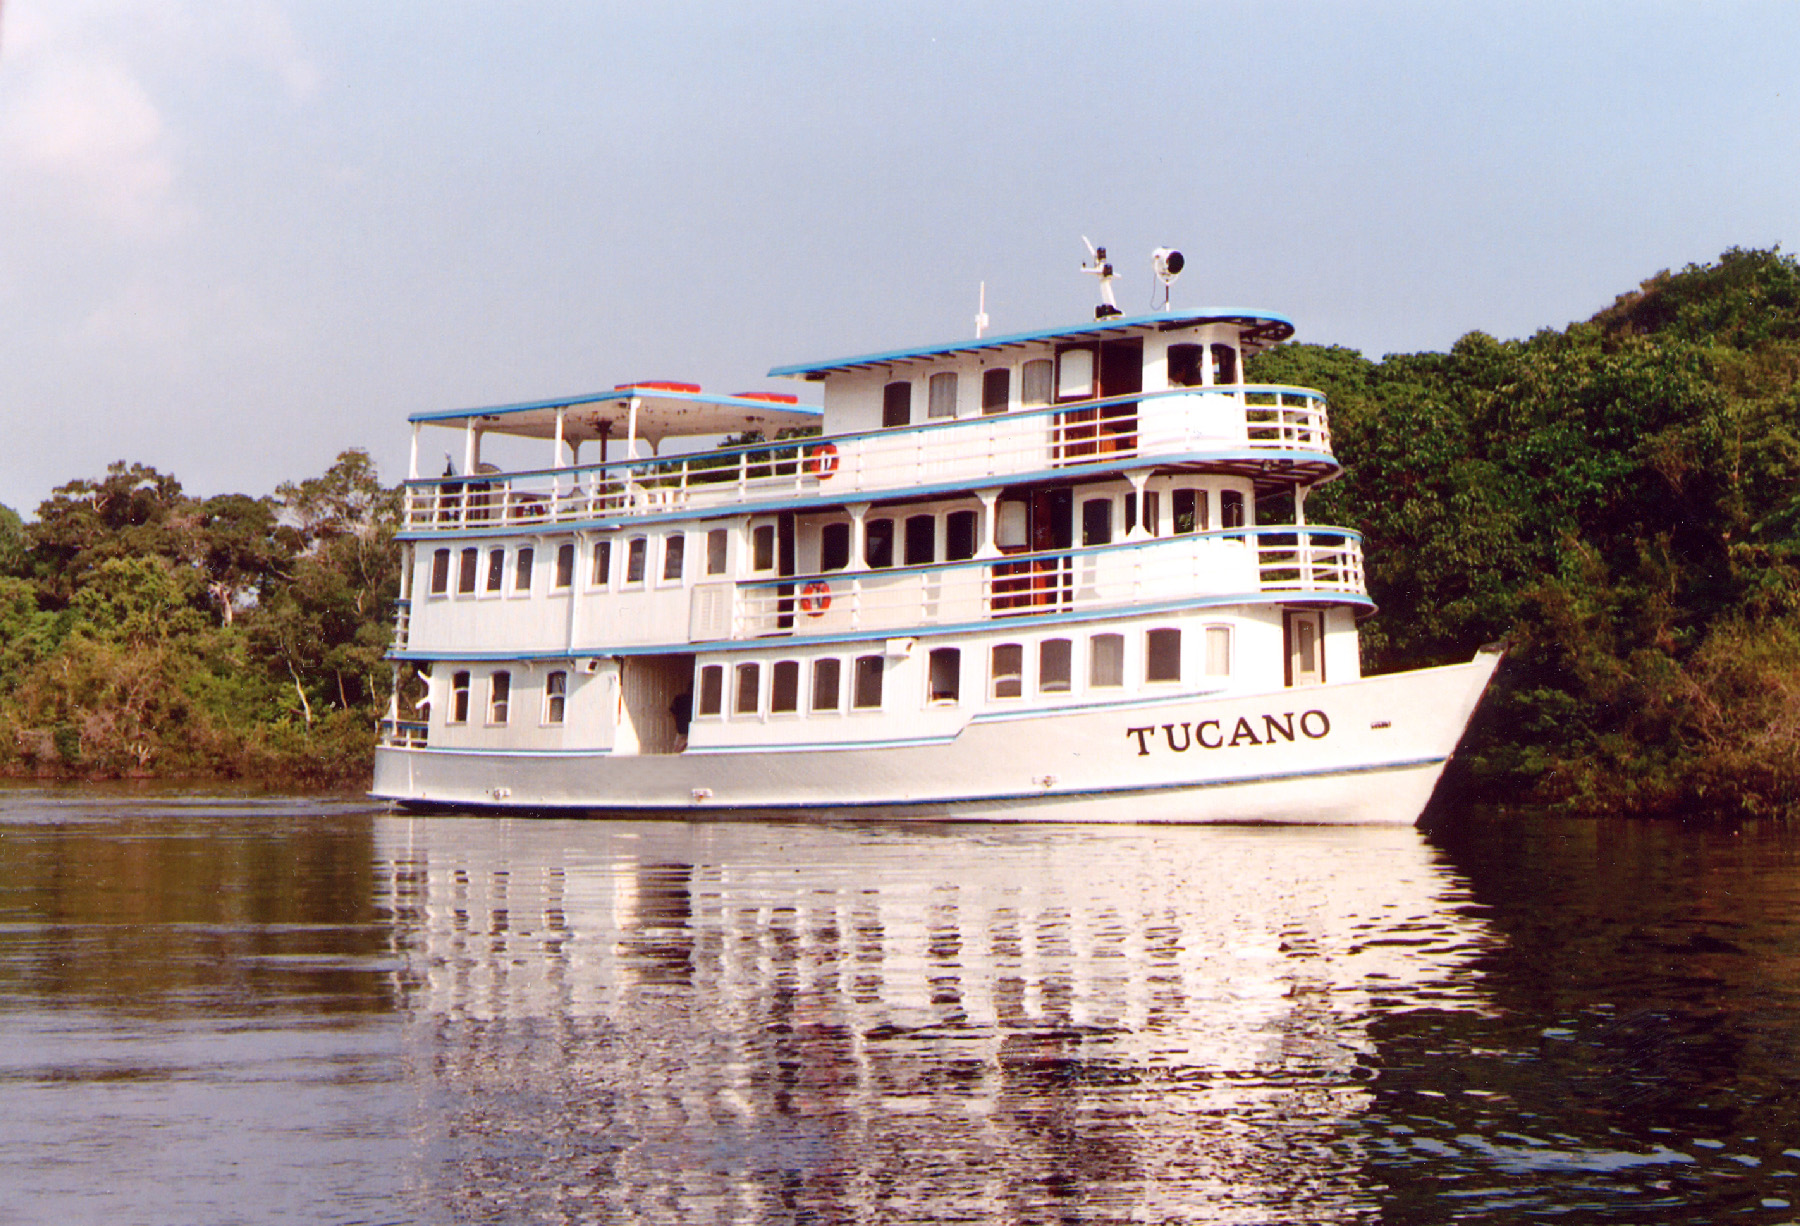 The river yacht Toucan lies at anchor on the Amazon River near Amazonia.